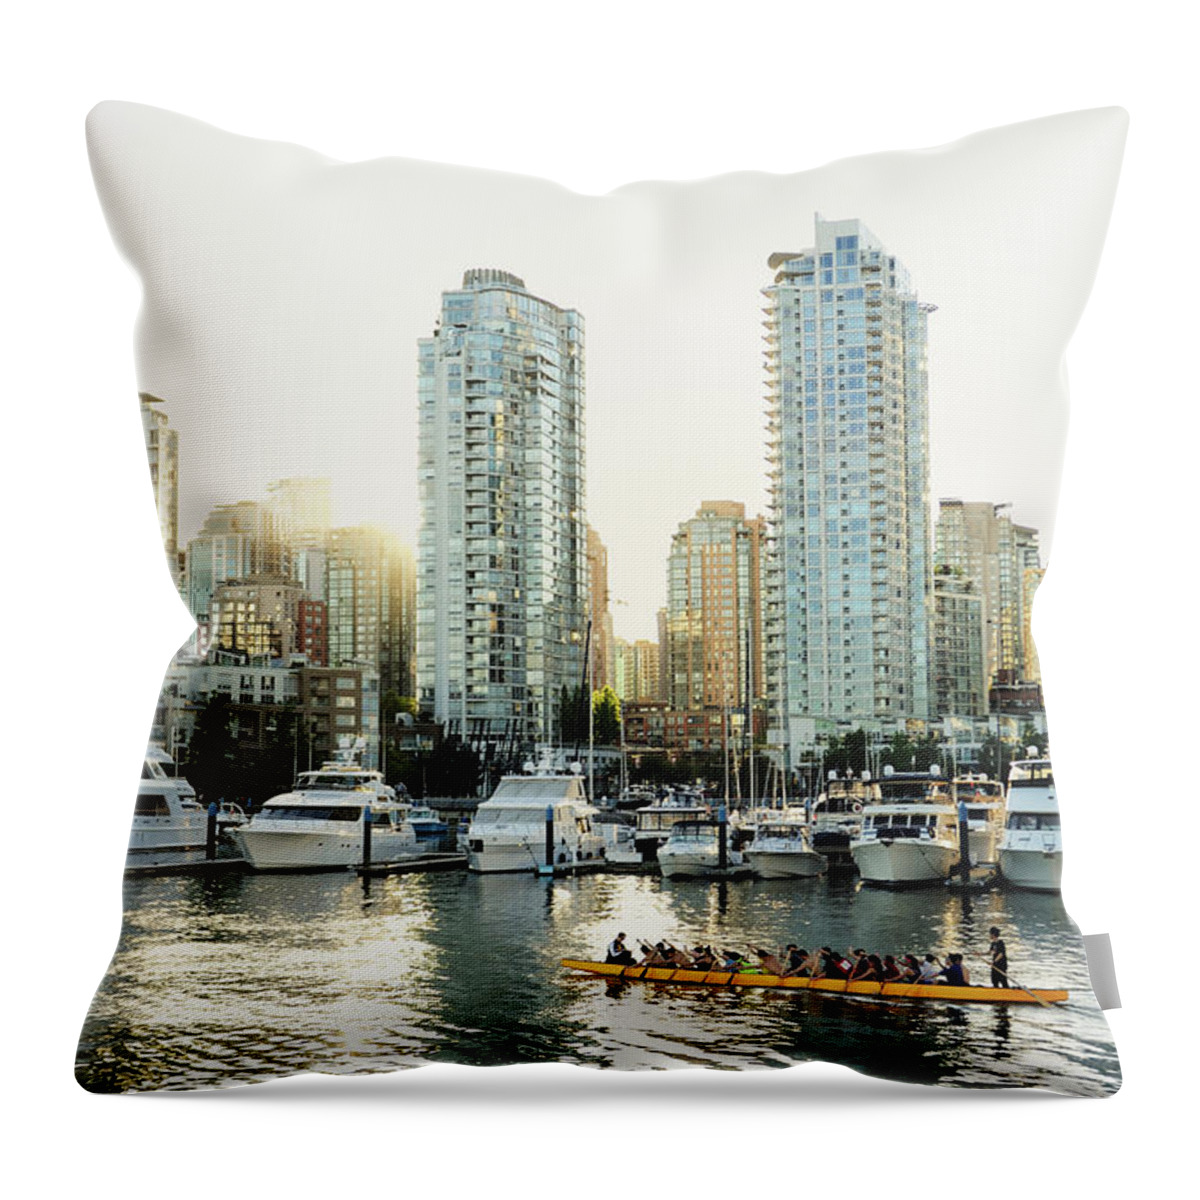 Tranquility Throw Pillow featuring the photograph Dragon Boating In Vancouver by Carlina Teteris